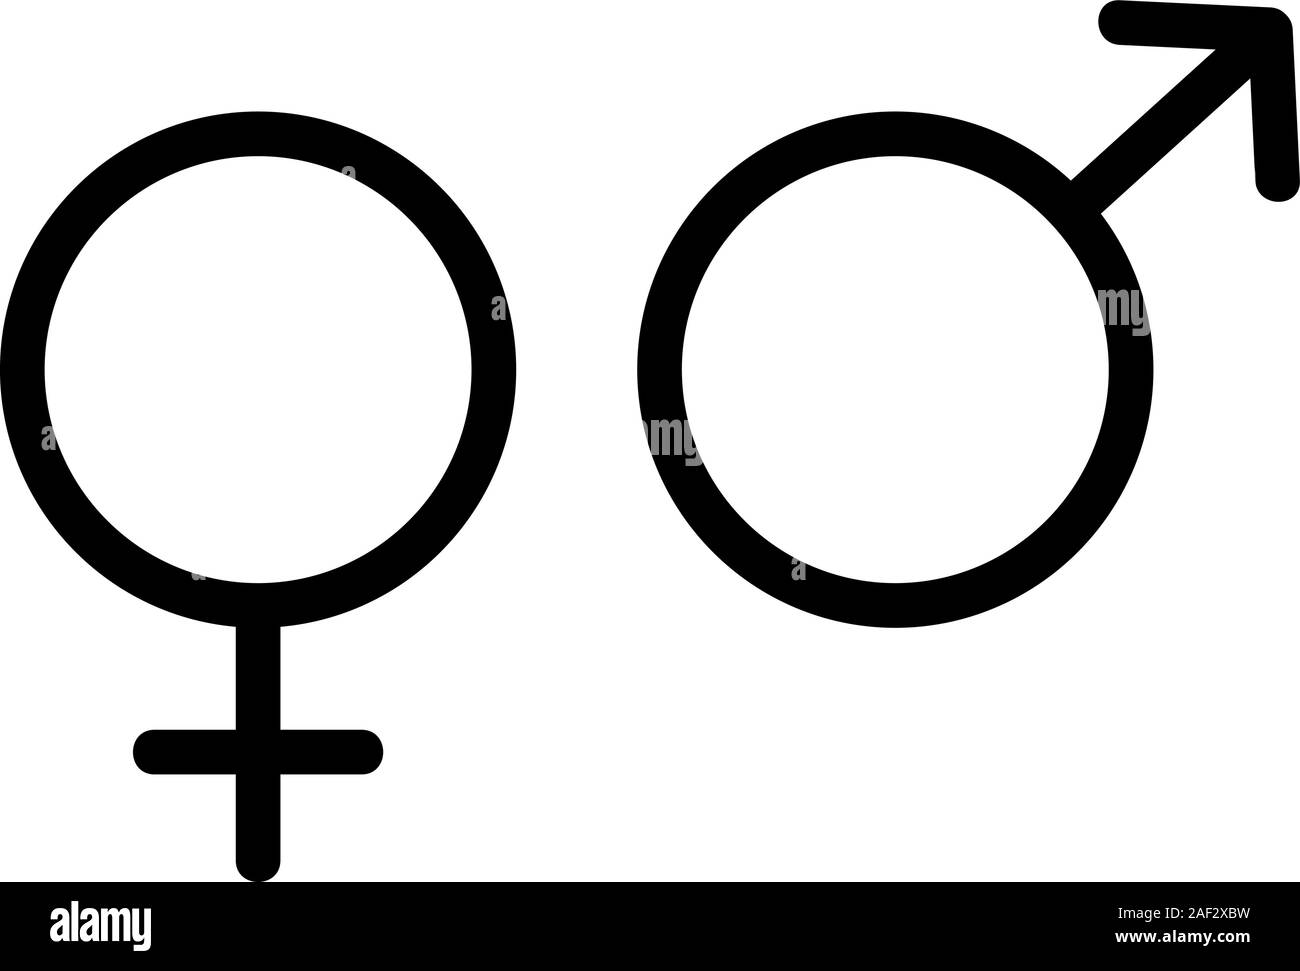 Men s and women s toilet icon vector. Isolated contour symbol illustration Stock Vector